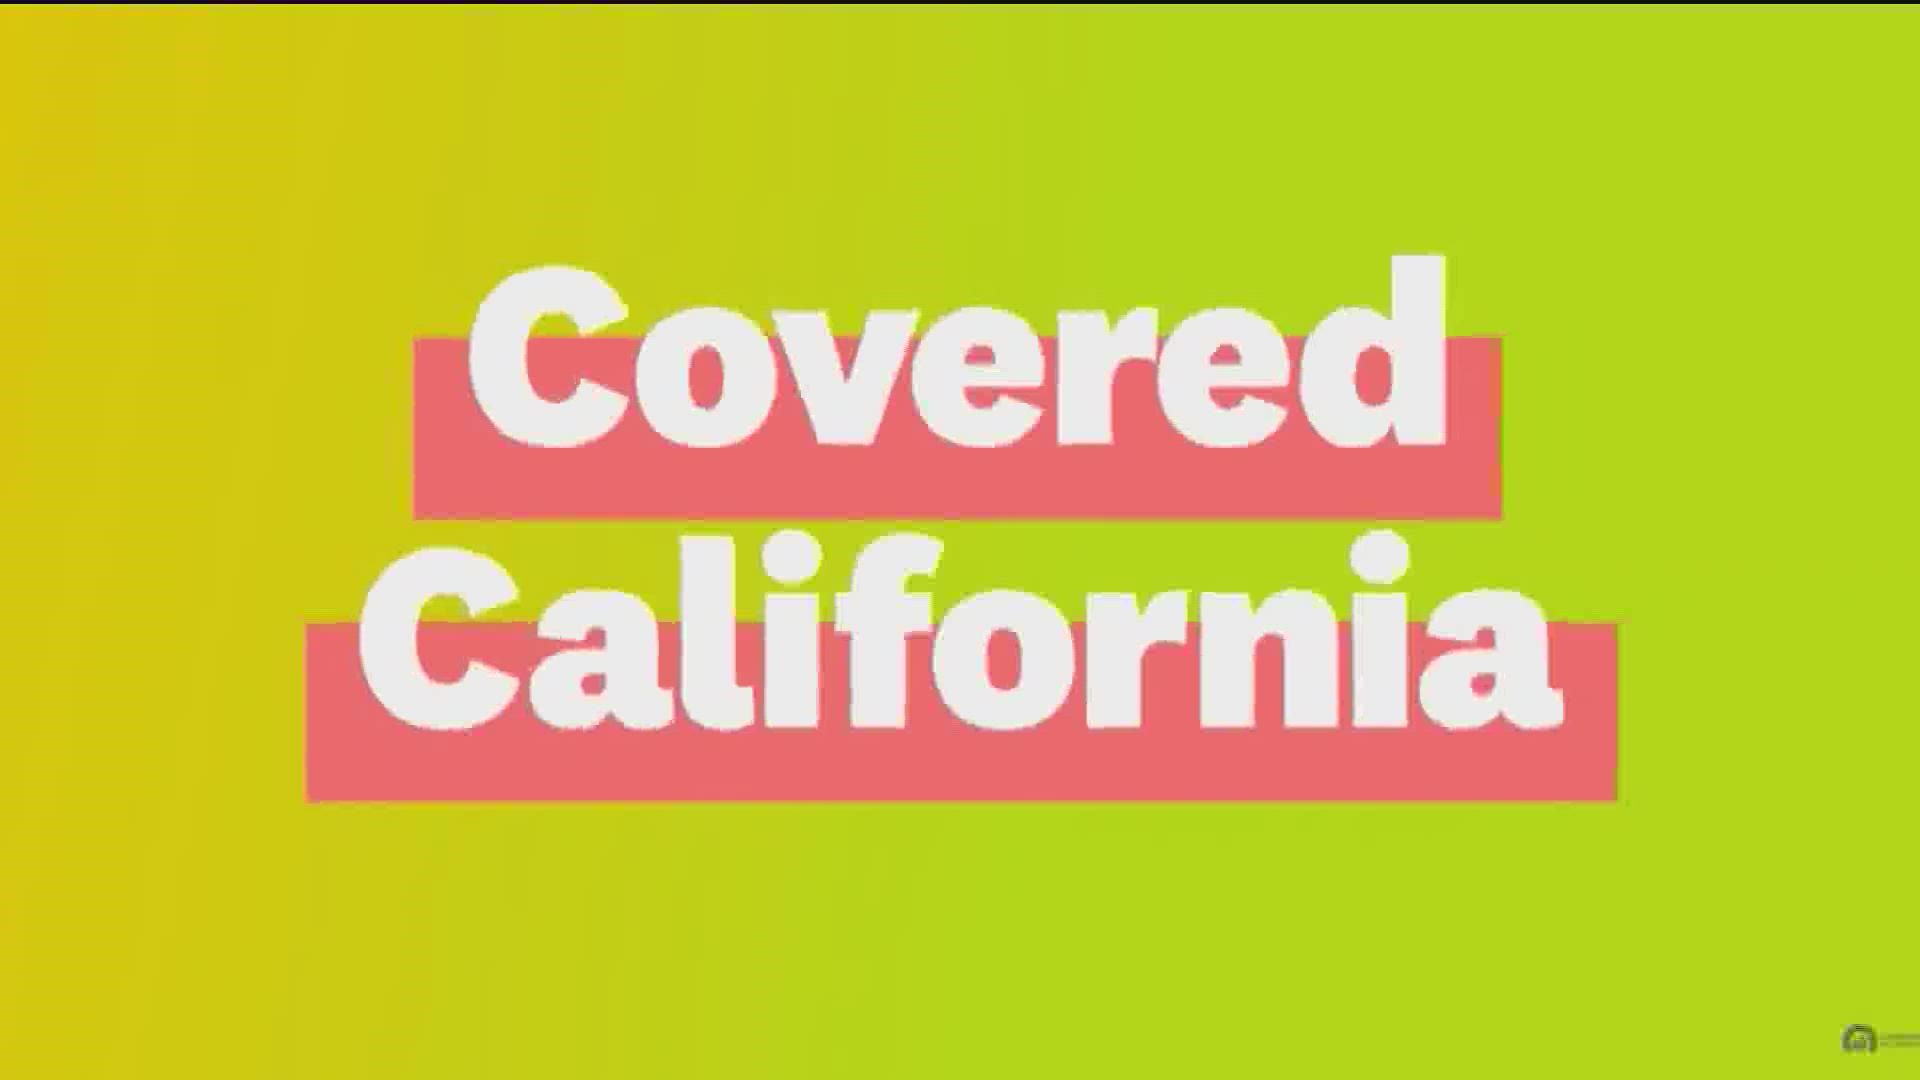 Hundreds of thousands more Californians are now eligible for low- or no-cost health insurance coverage, who previously did not qualify.